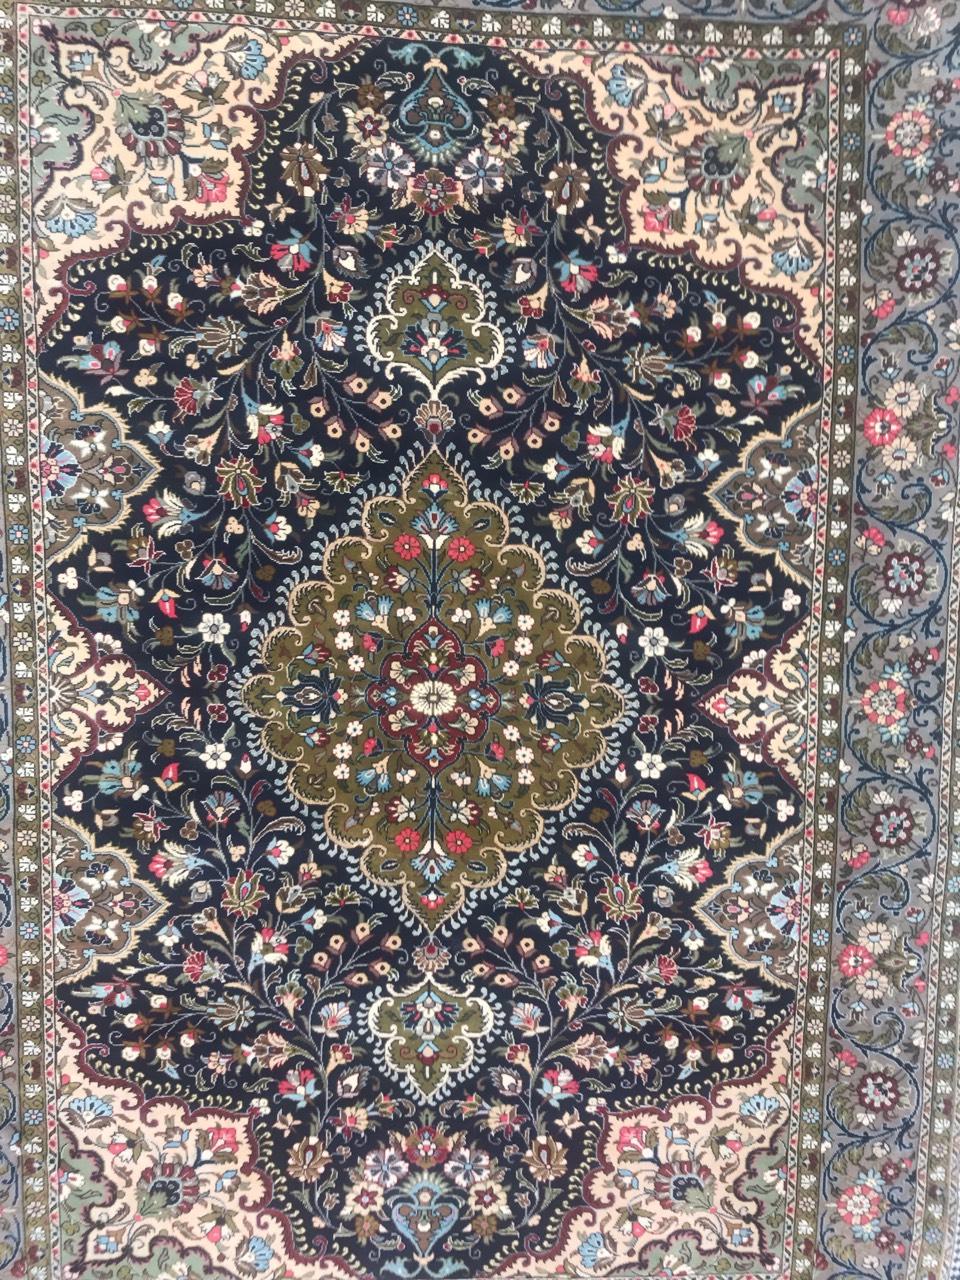 Exquisite fine rug featuring a stunning floral design and a captivating central medallion. This meticulously hand-knotted masterpiece boasts beautiful colors, including shades of blue, green, and pink. Crafted with precision using wool velvet on a